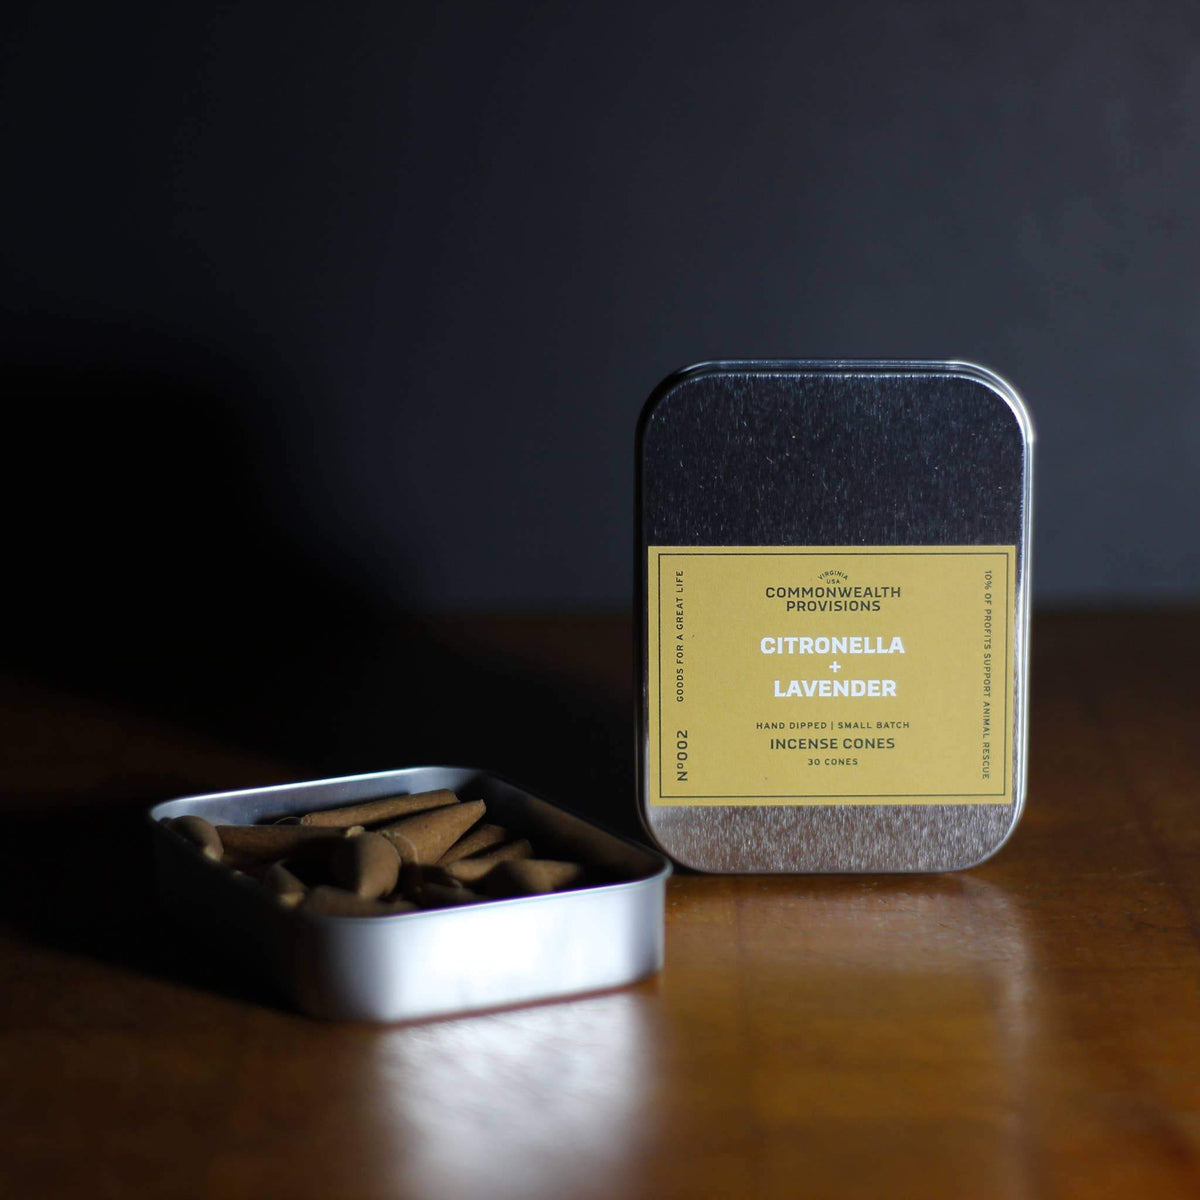 A tin container labeled "Commonwealth Provisions Citronella + Lavender Incense Cones" with the lid open, showing the cones inside, placed on a wooden surface against a dark background.